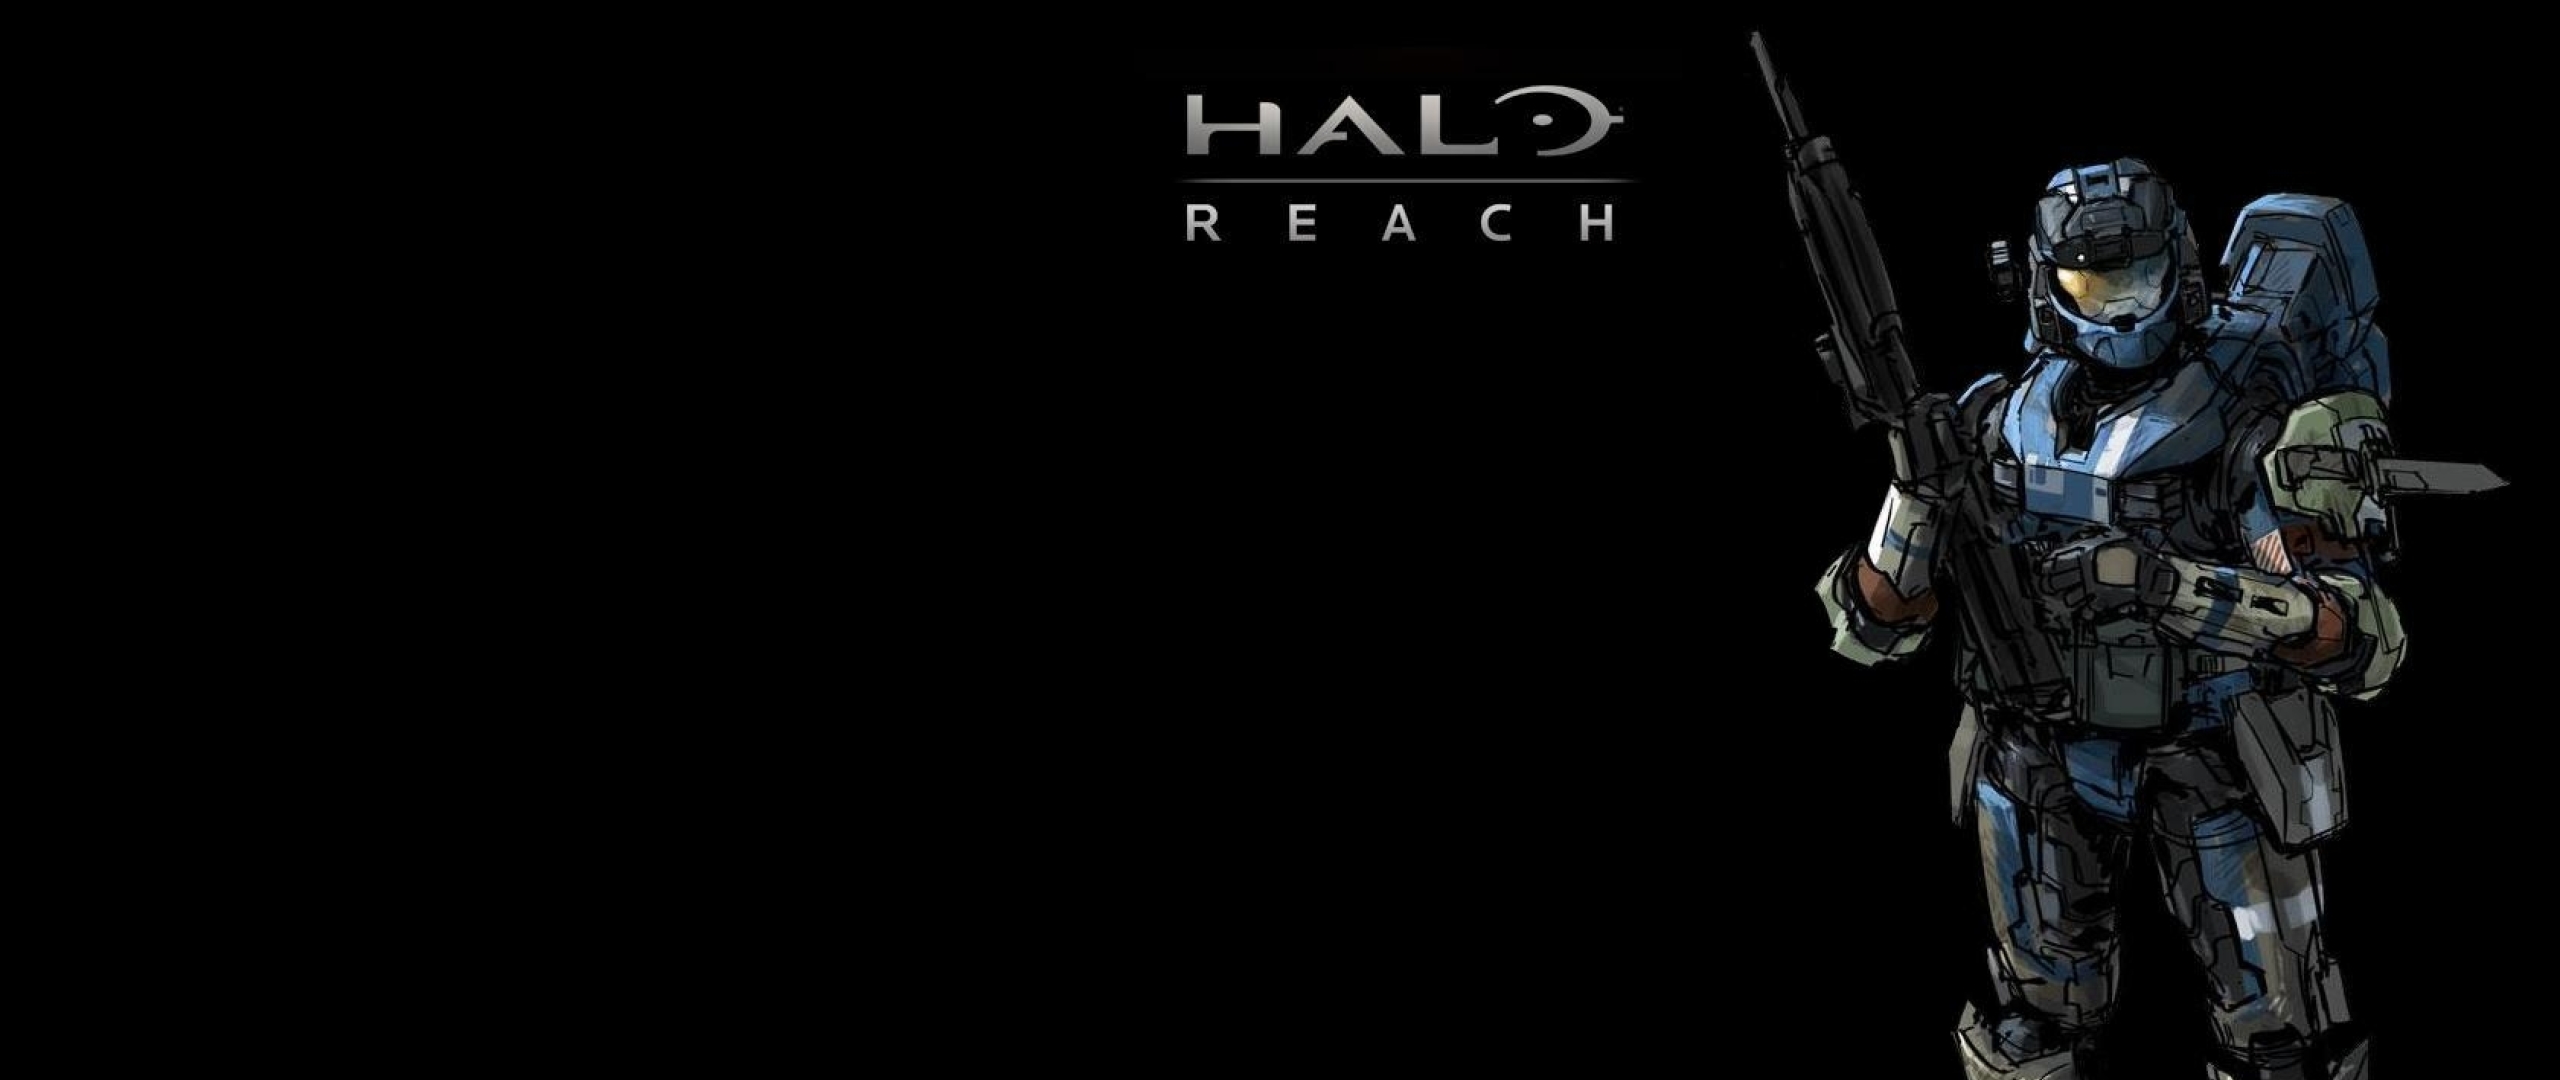 Halo Reach Download For Mac